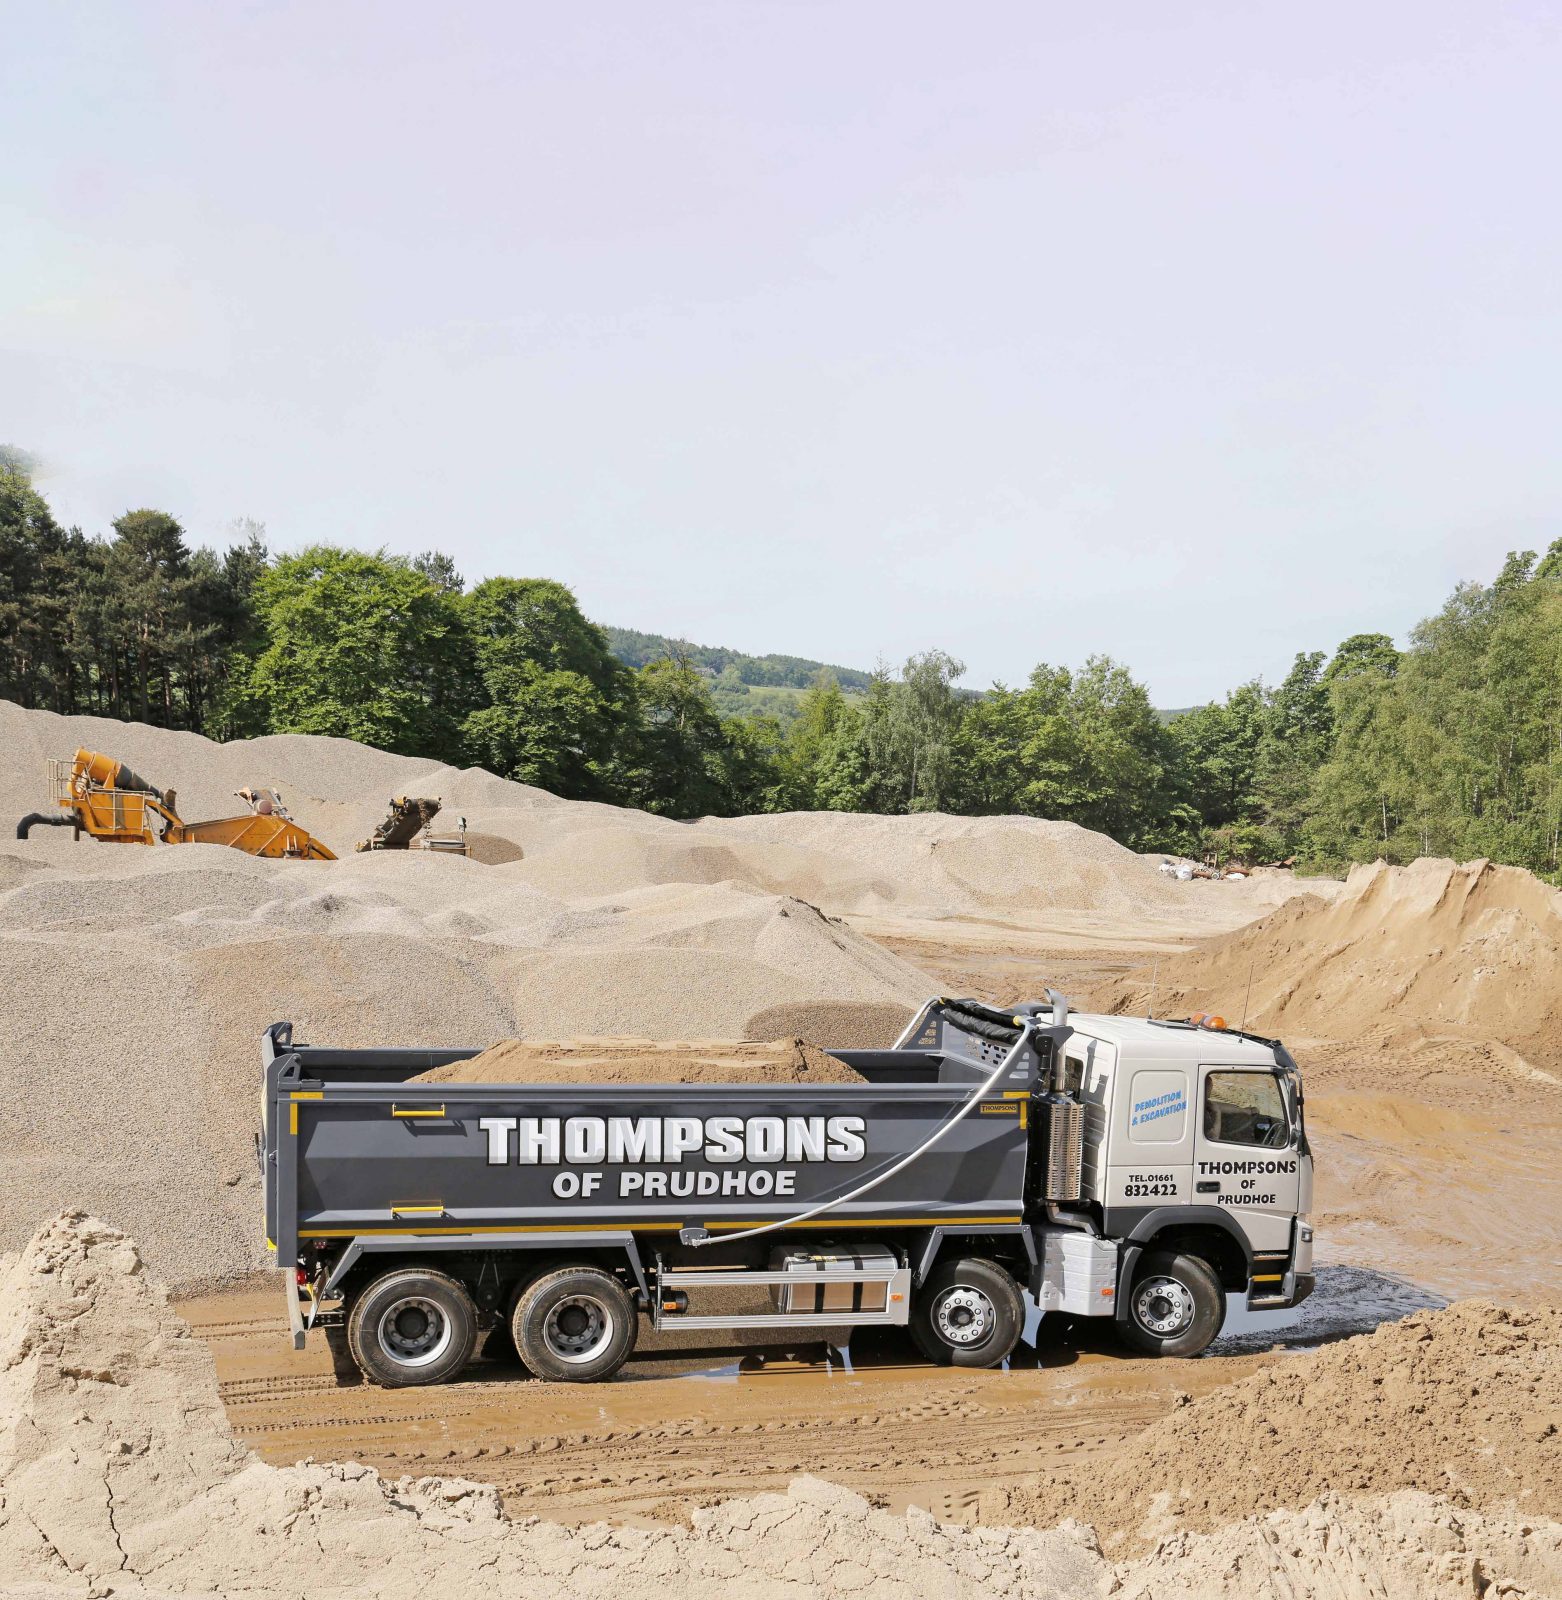 Thompsons of Prudhoe truck